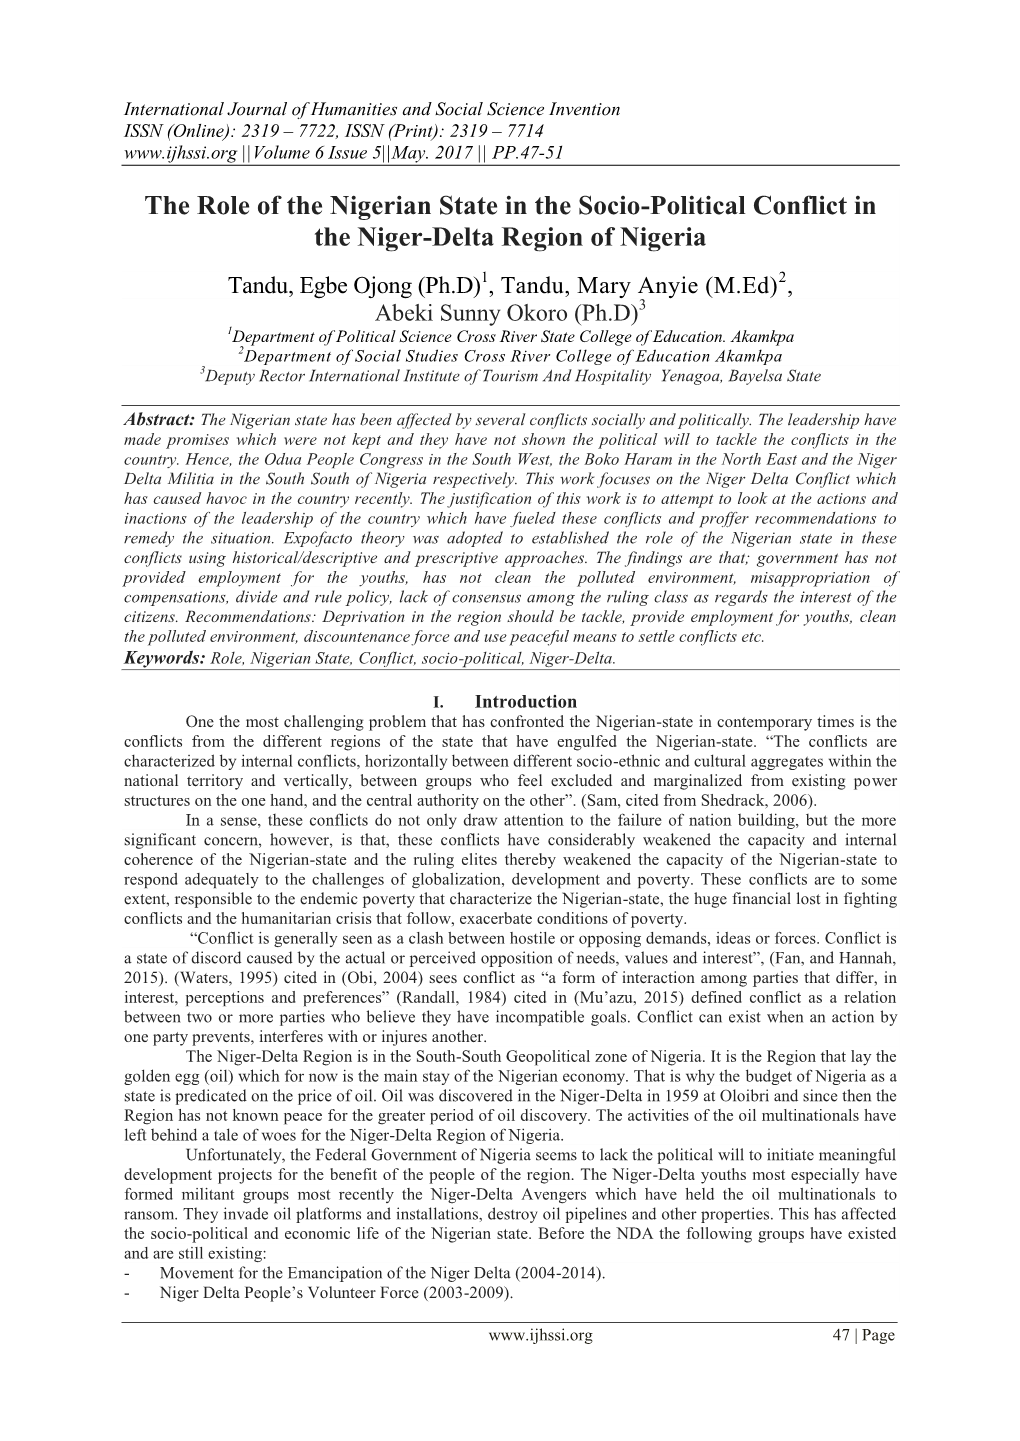 The Role of the Nigerian State in the Socio-Political Conflict in the Niger-Delta Region of Nigeria